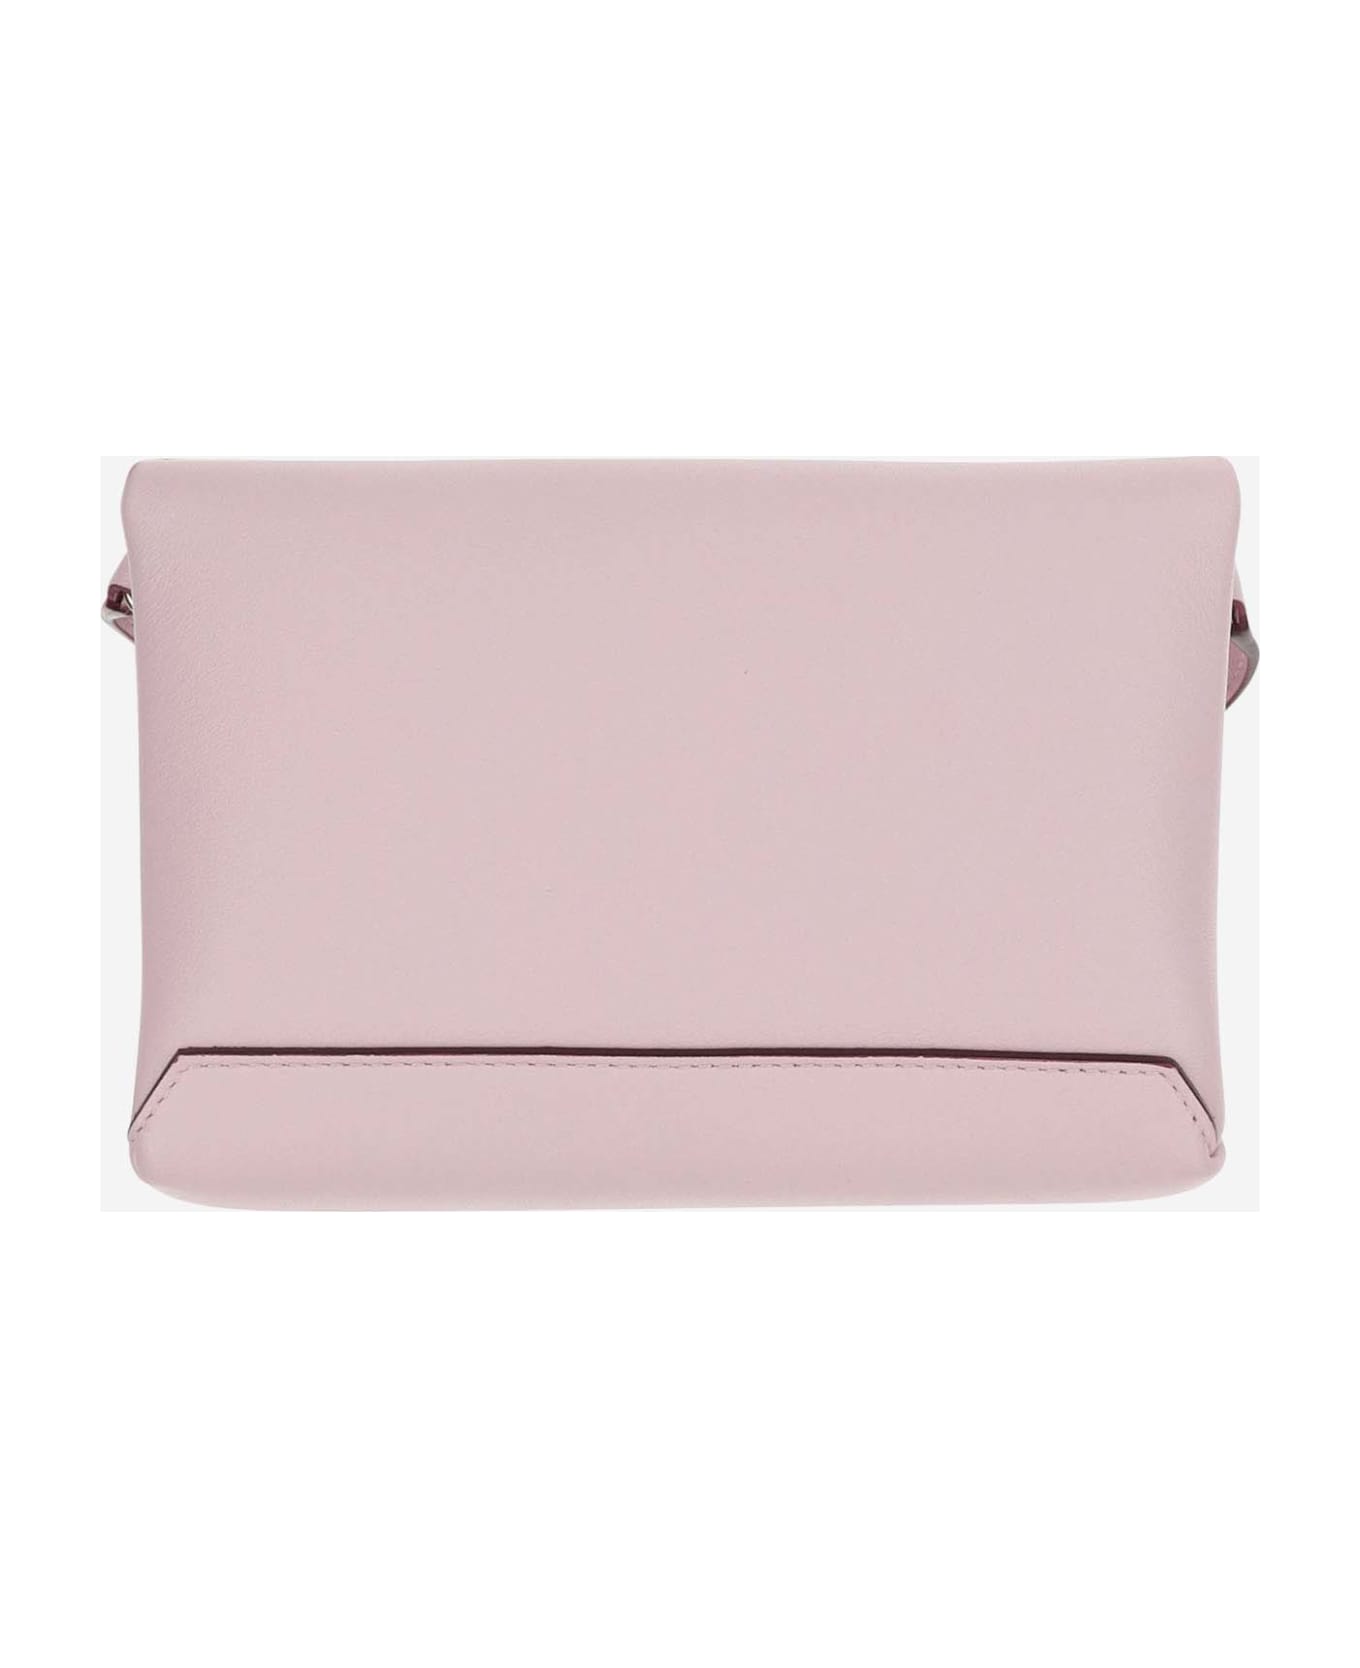 Victoria Beckham Shoulder Bag With Chain - Pink ショルダーバッグ